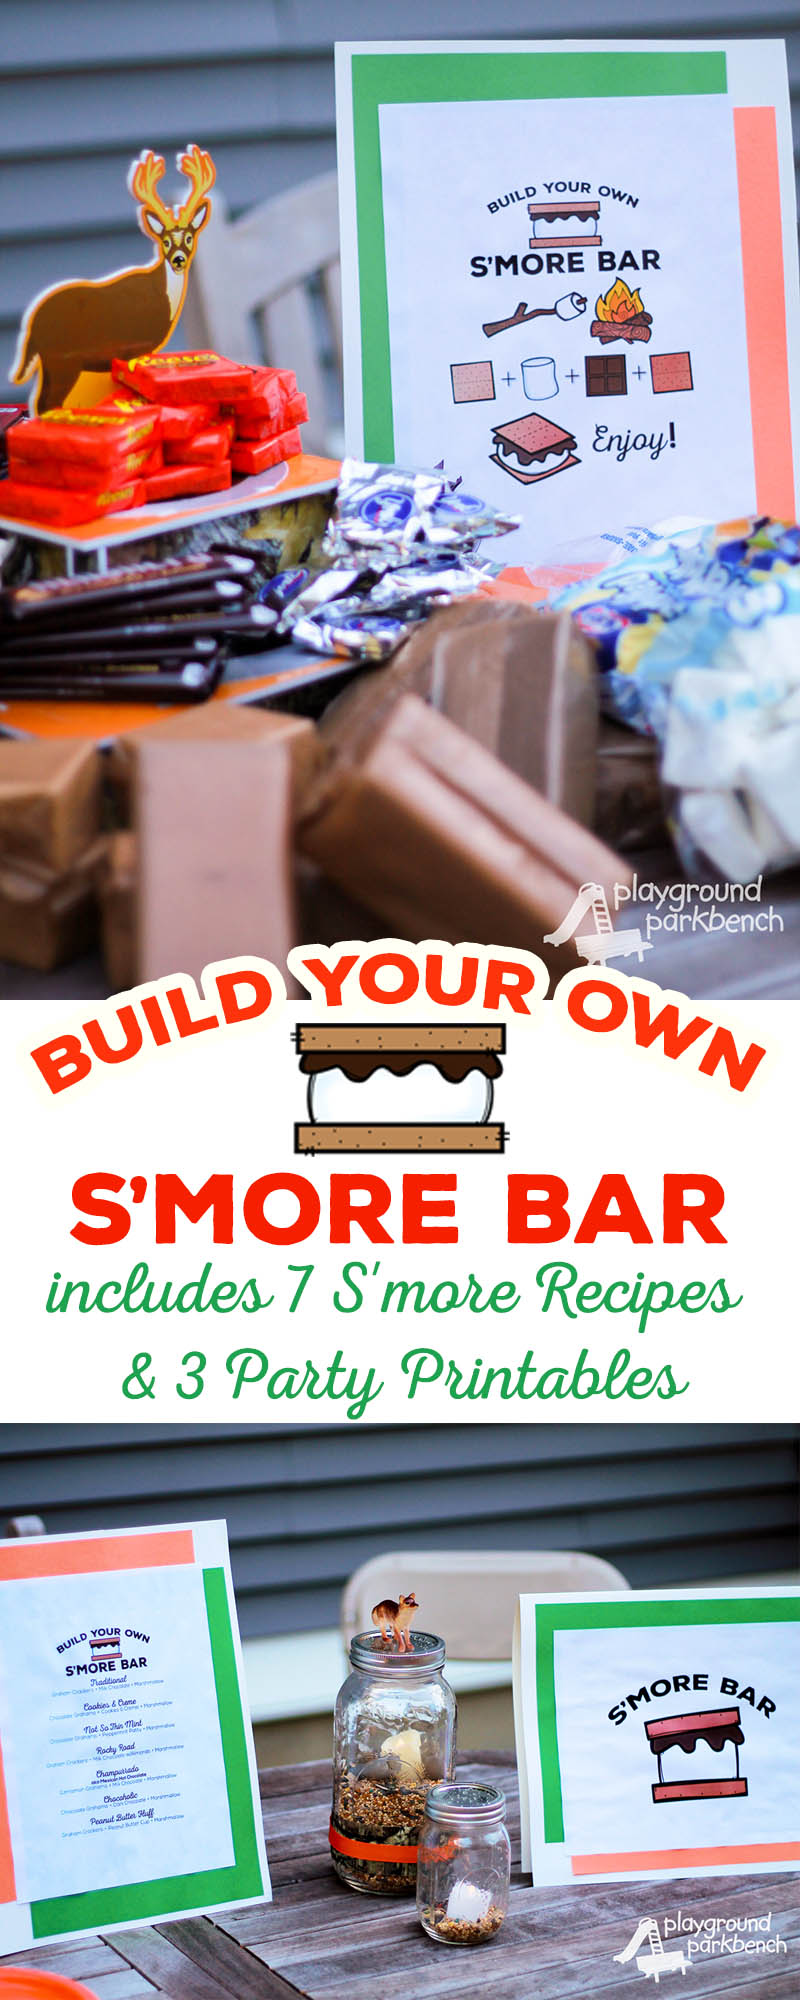 No birthday party, summer gathering or fall festivity is complete without a Make Your Own S'mores Bar! It is the perfect quick, easy and affordable alternative to an elaborate dessert table. And best of all, it doubles as both entertainment, as well as dessert. Get our 7 different s'more recipes, as well as fun S'more Bar Party Printables. | Birthday Party | Outdoor Party | Dessert Table | S'mores | Party Ideas | Party Supplies | Party Planning | Summer | Fall | Camping |